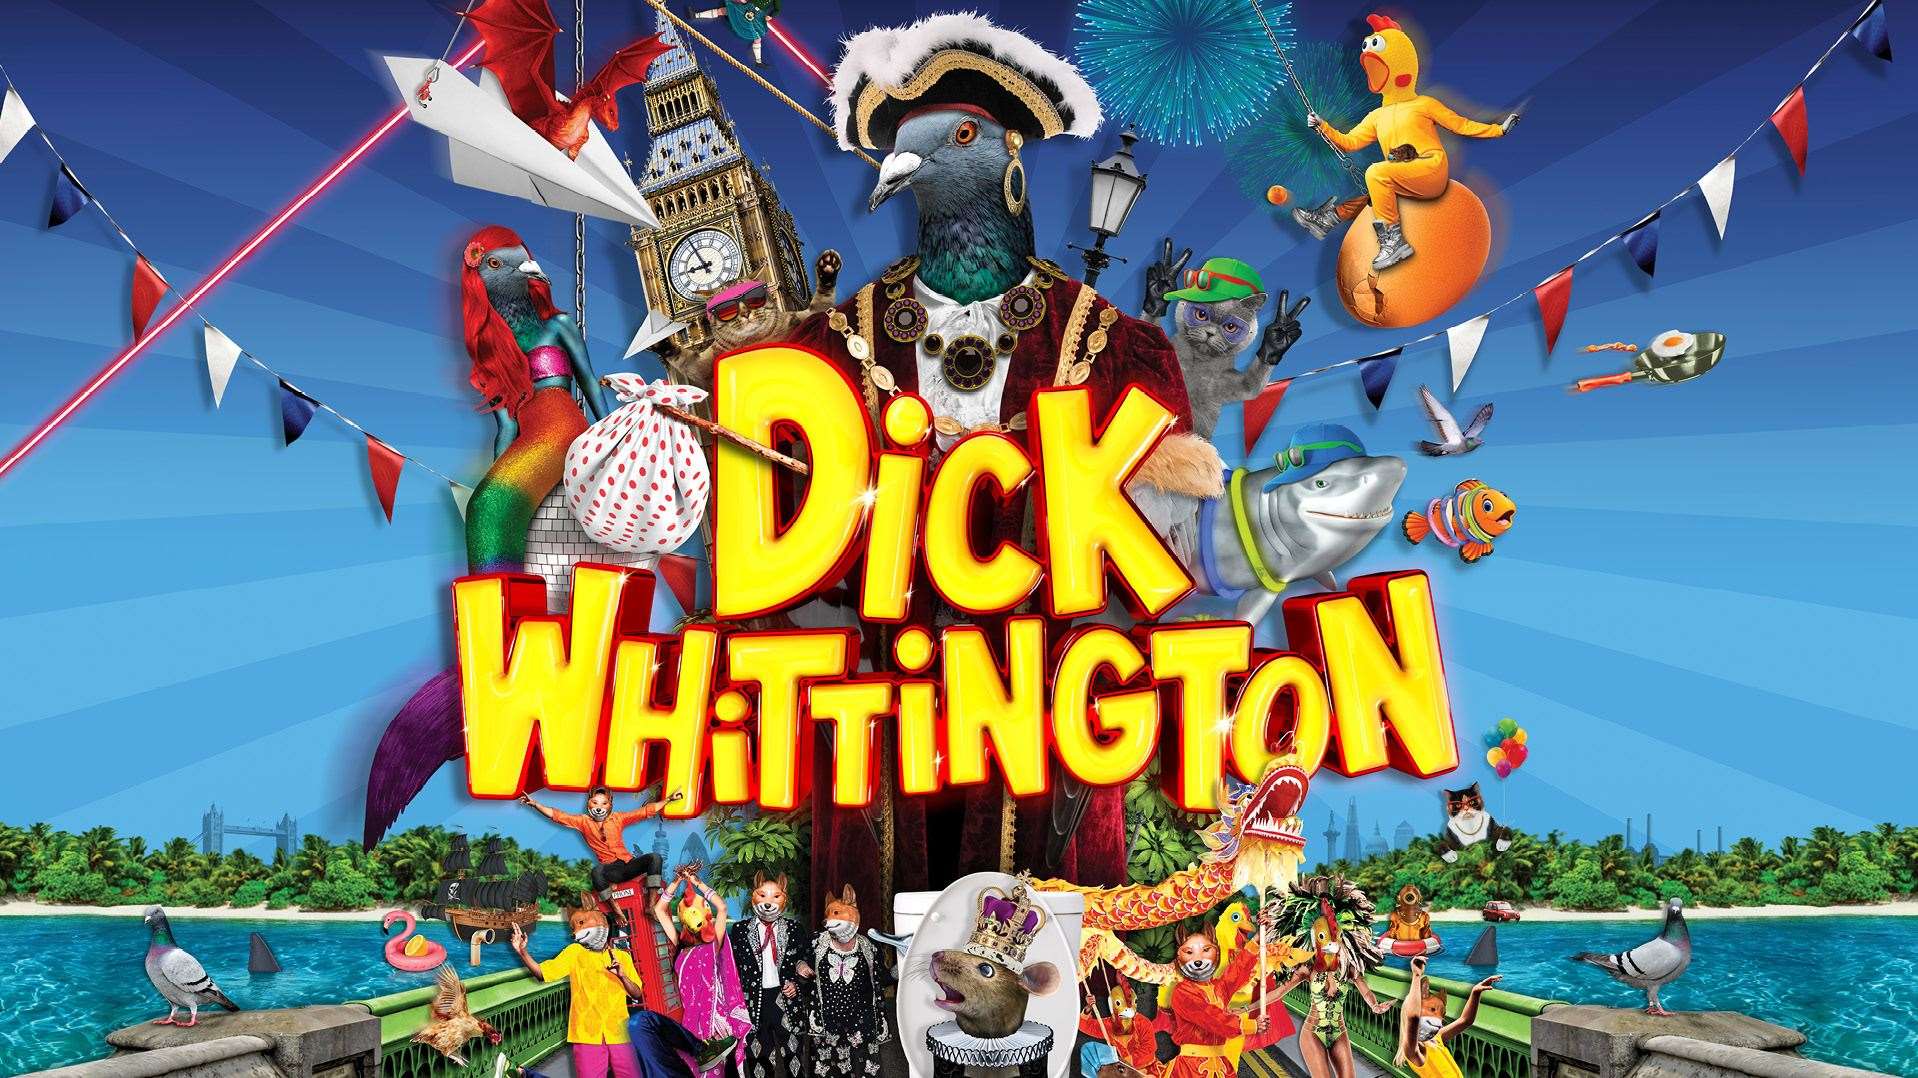 Dick Whittington by the National Theatre